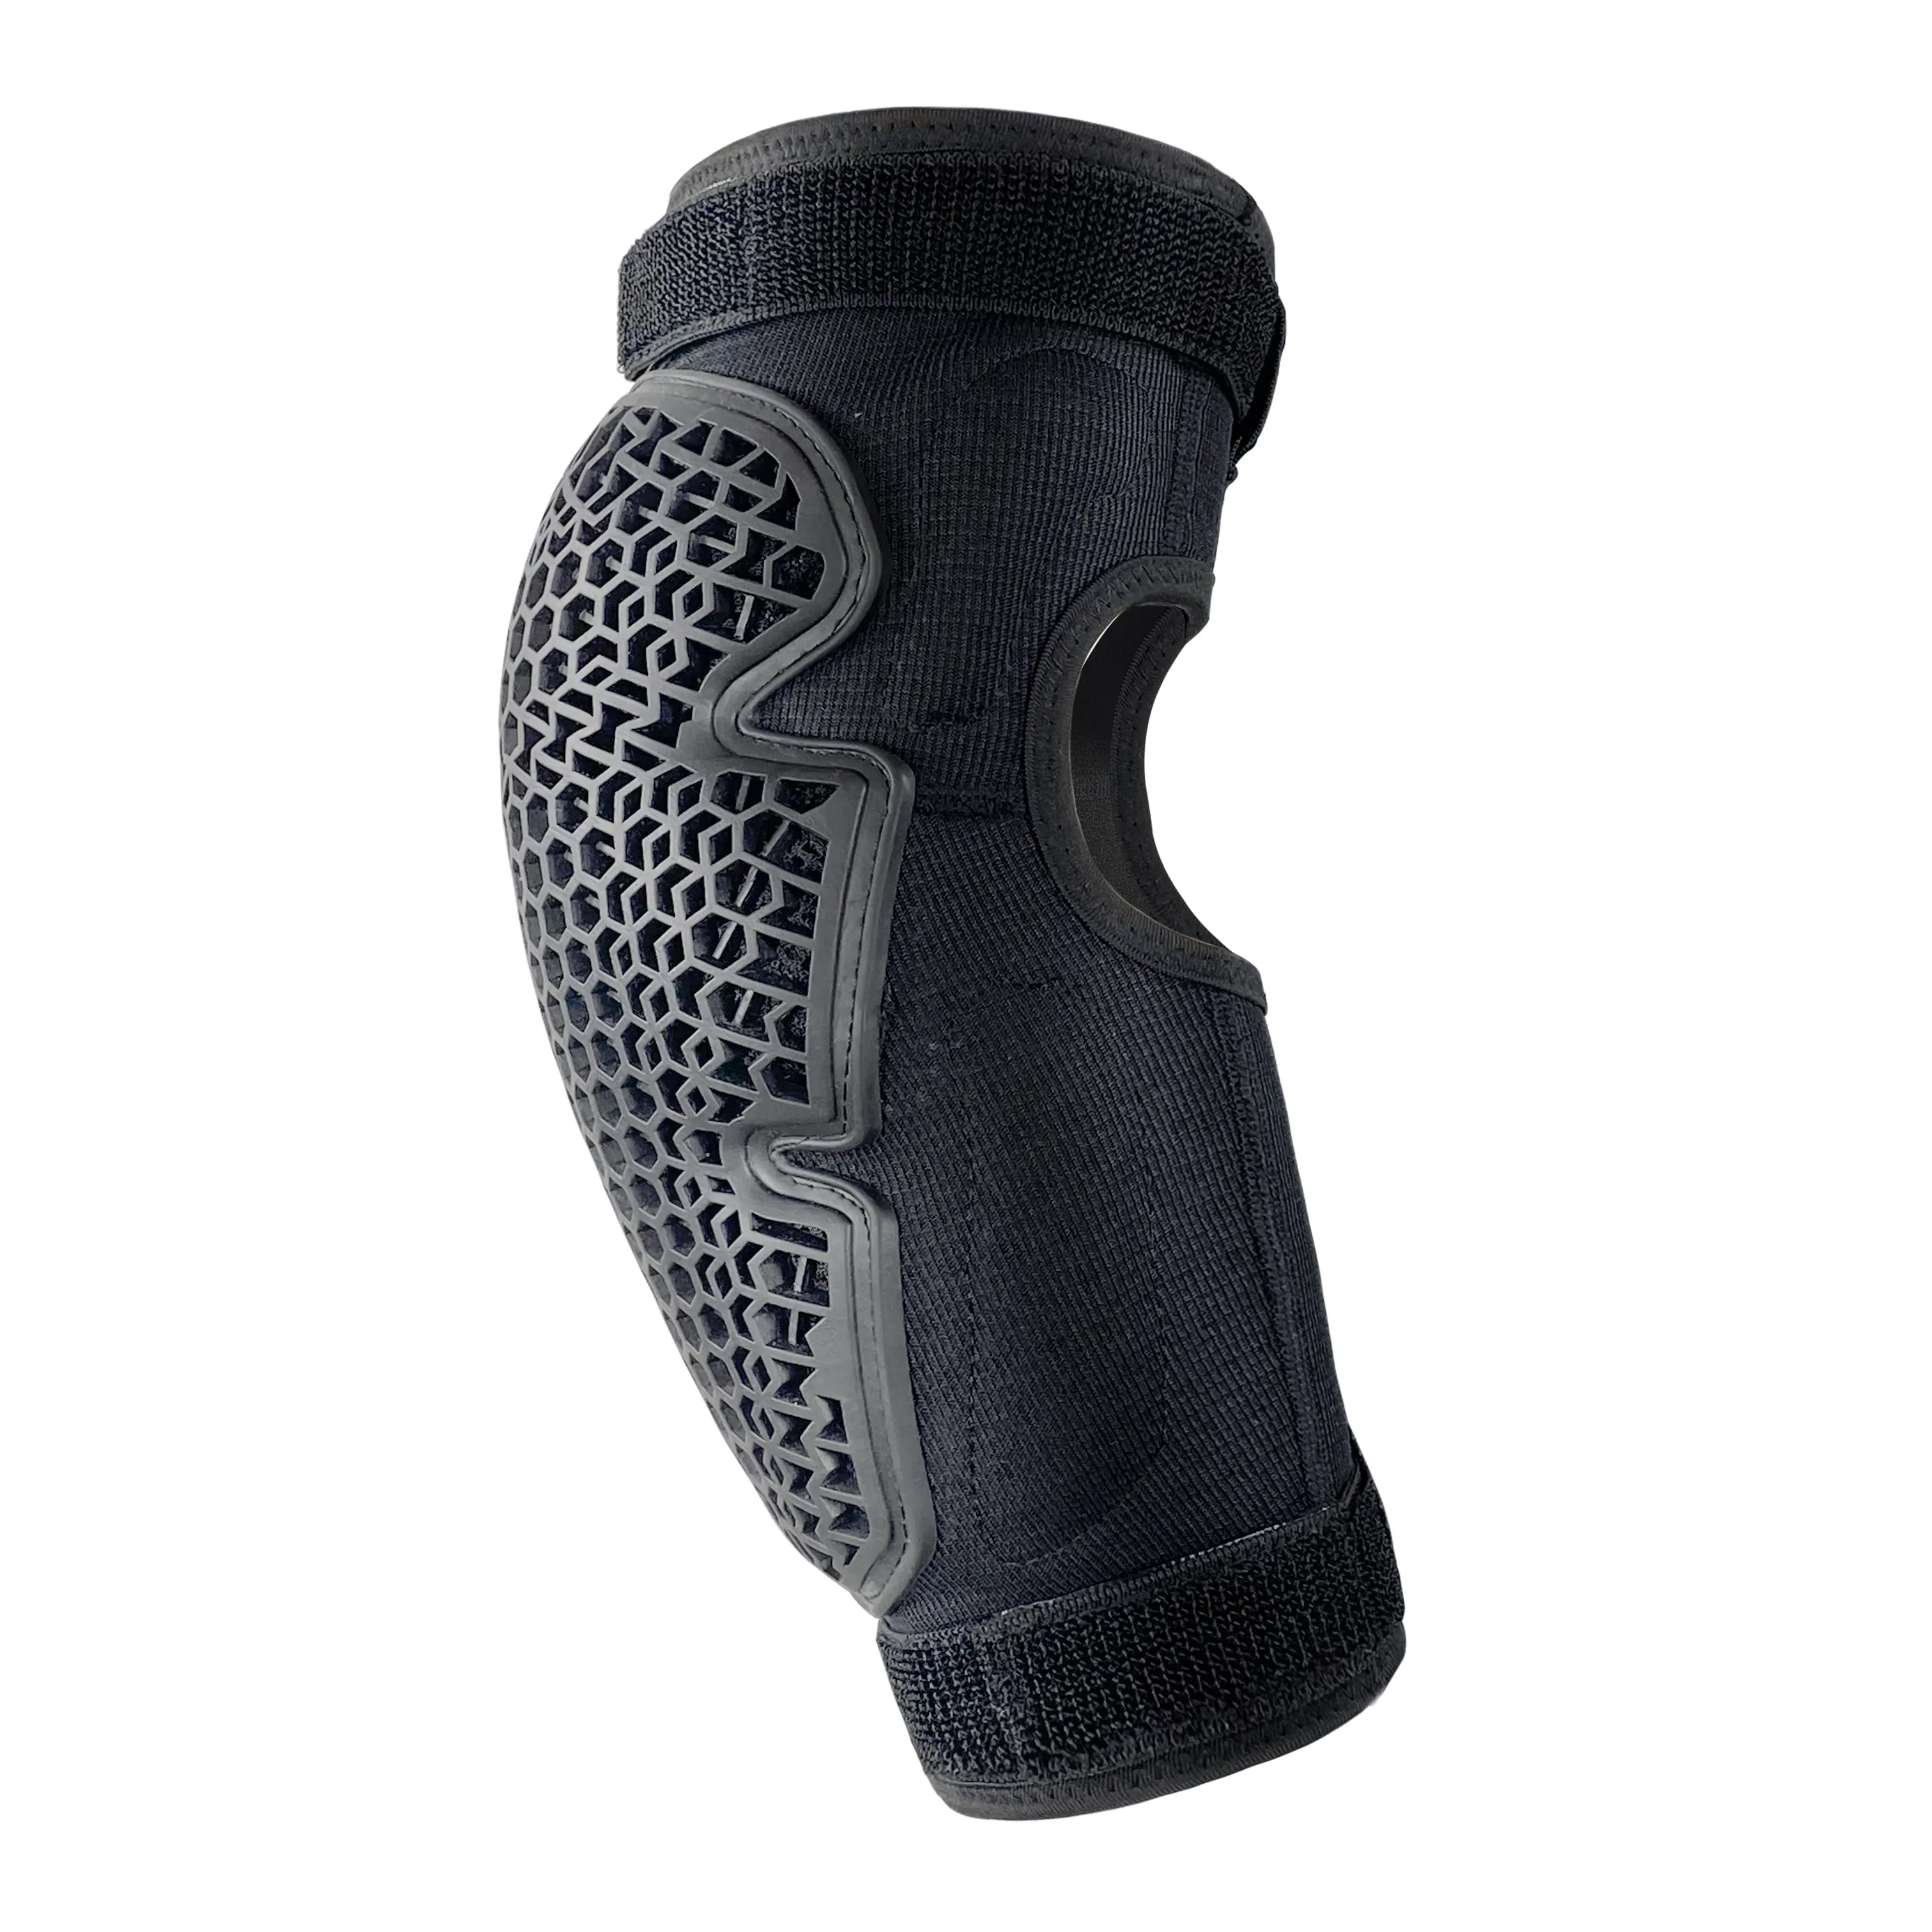 Enduro trail carbon elastomer sleeve tear-resistant mesh elastic bands Knee elbow guard protector with silicone gripper